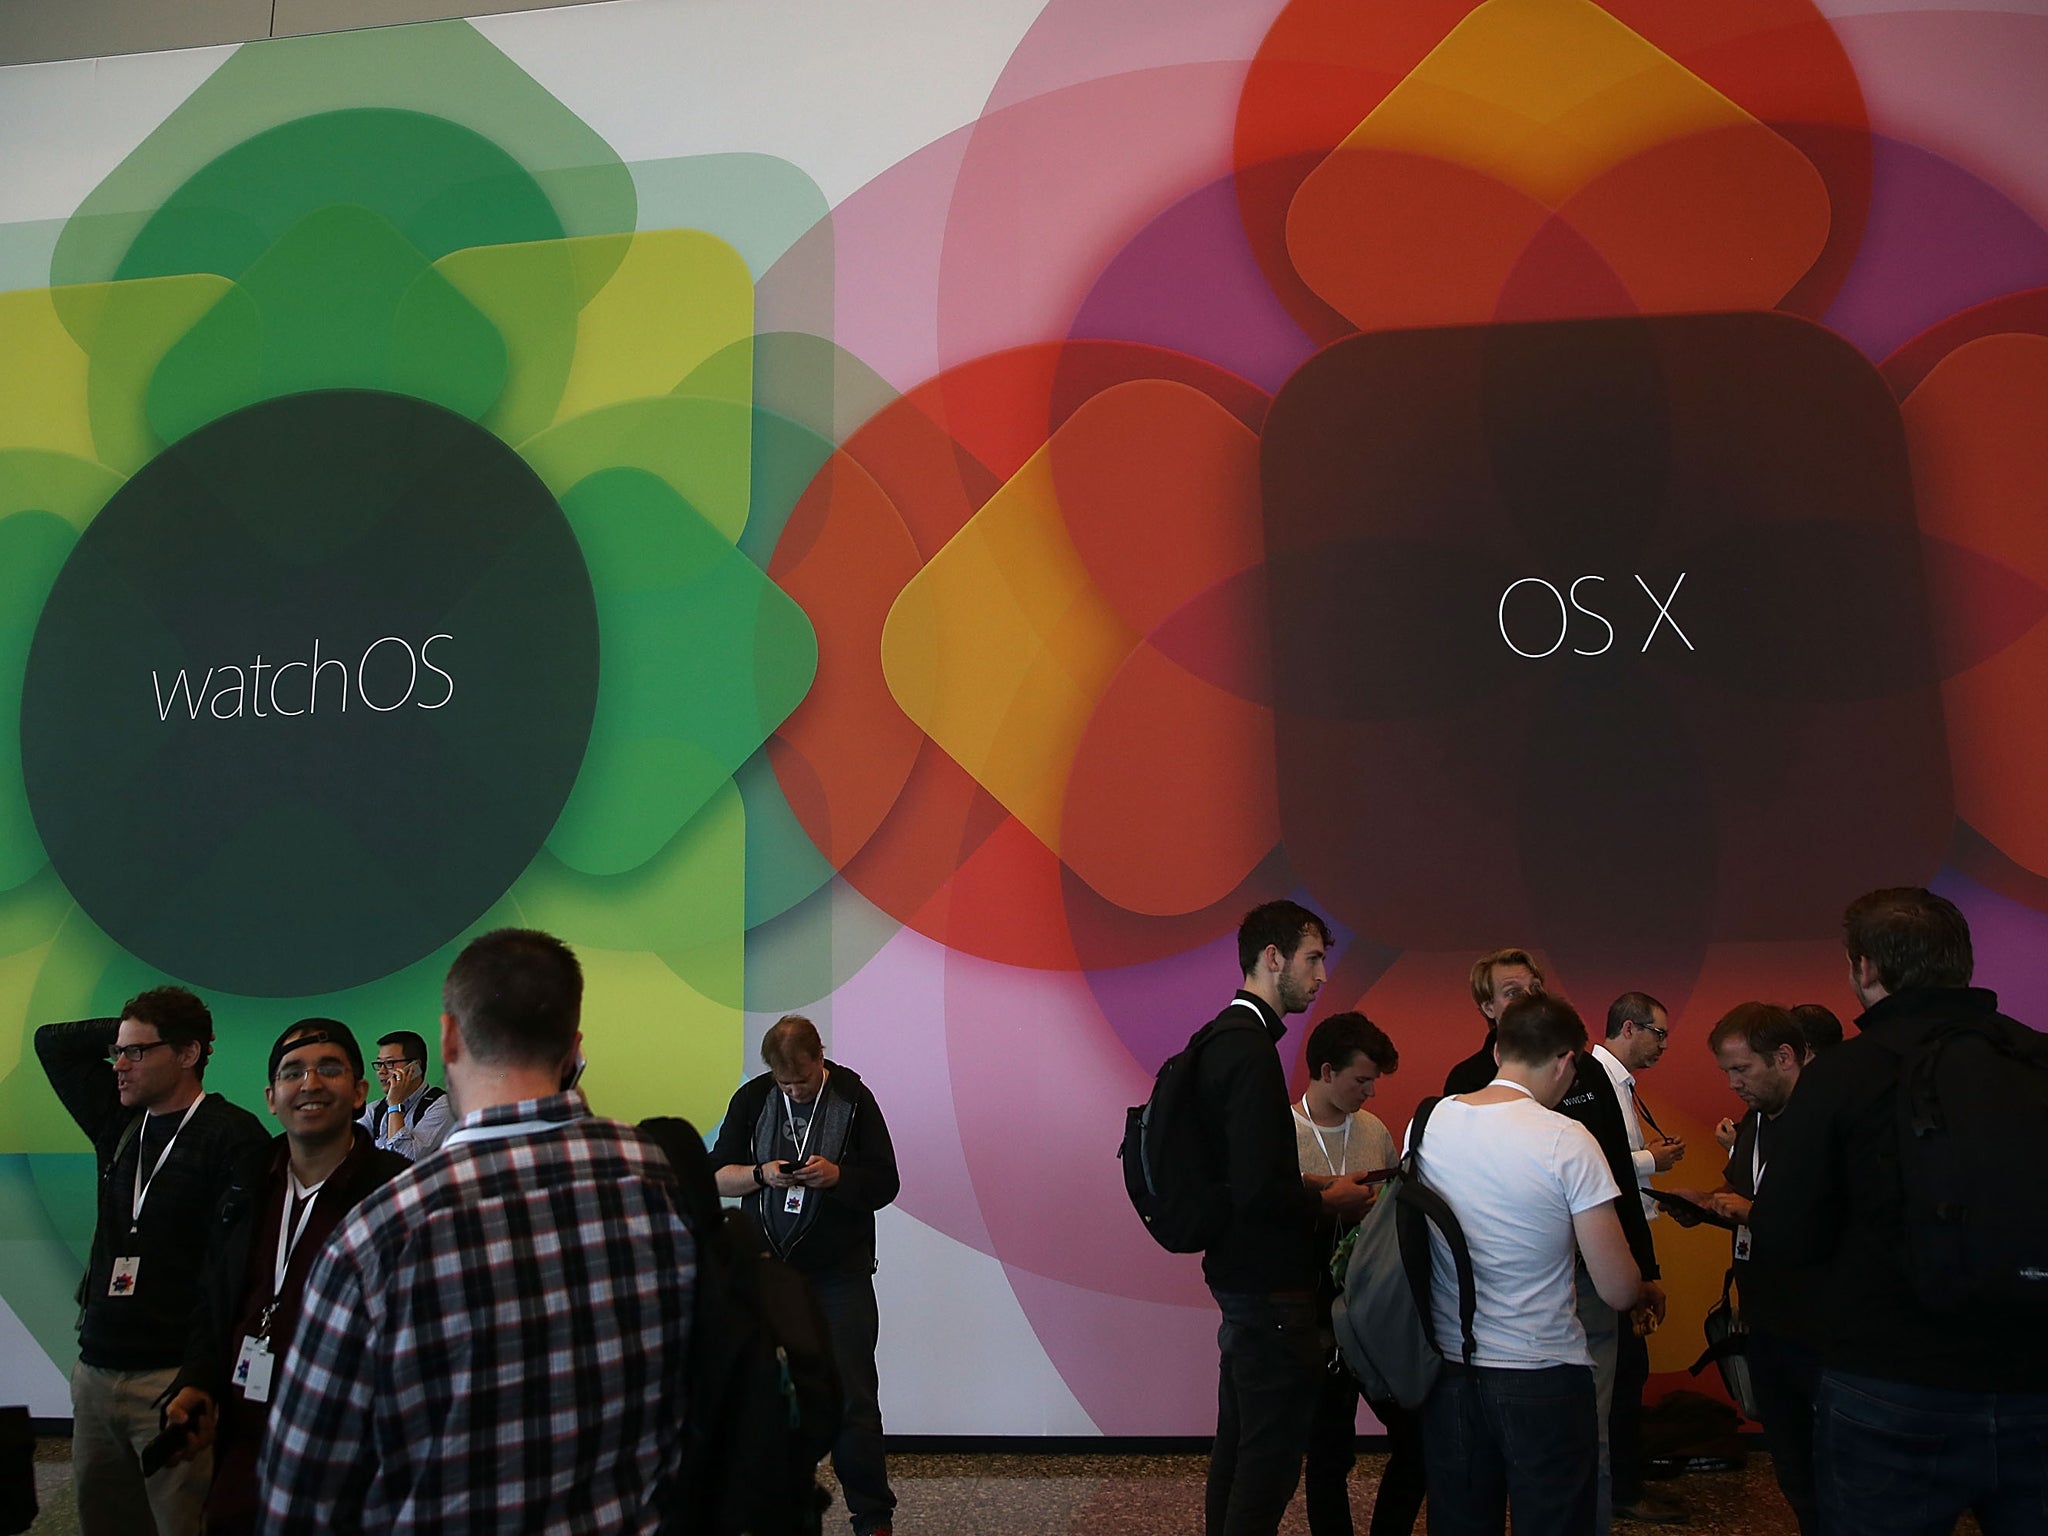 Signs for watchOS and Mac OS — the Apple Watch and Mac operating systems — hang at WWDC, where updates to both were announced